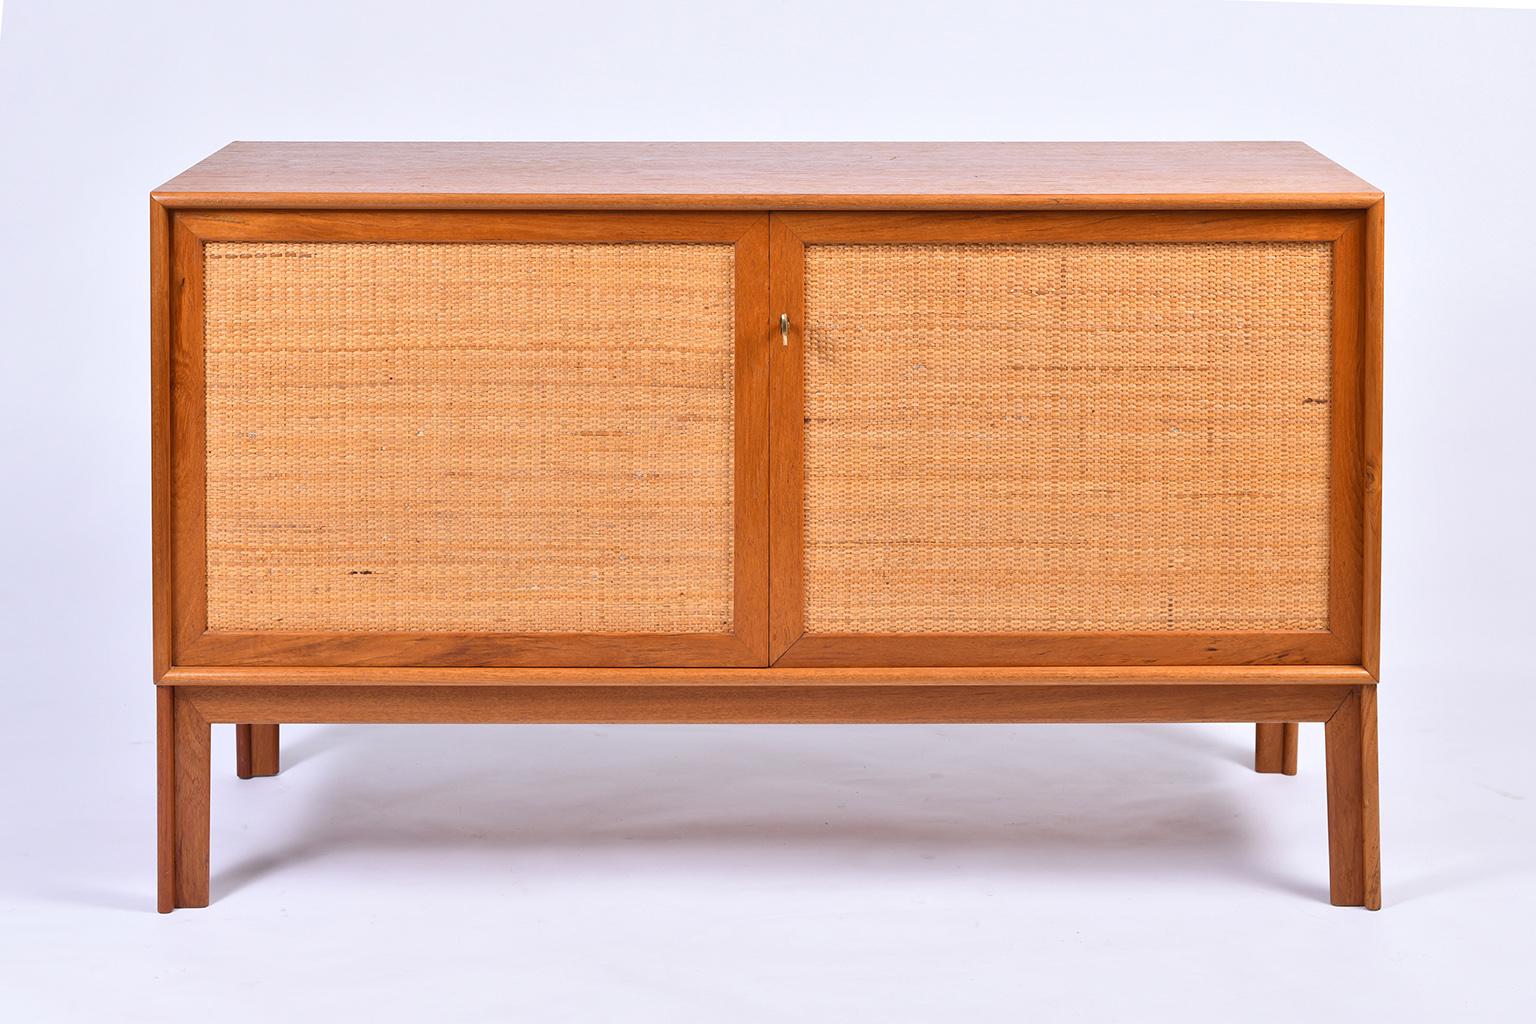 Pair of oak and rattan sideboards designed by Alf Svensson for Bjästa.
The oak cabinet opening with two rattan clad doors with a brass key, to reveal adjustable shelves and drawers, on moulded legs.
Sweden, 1950s.